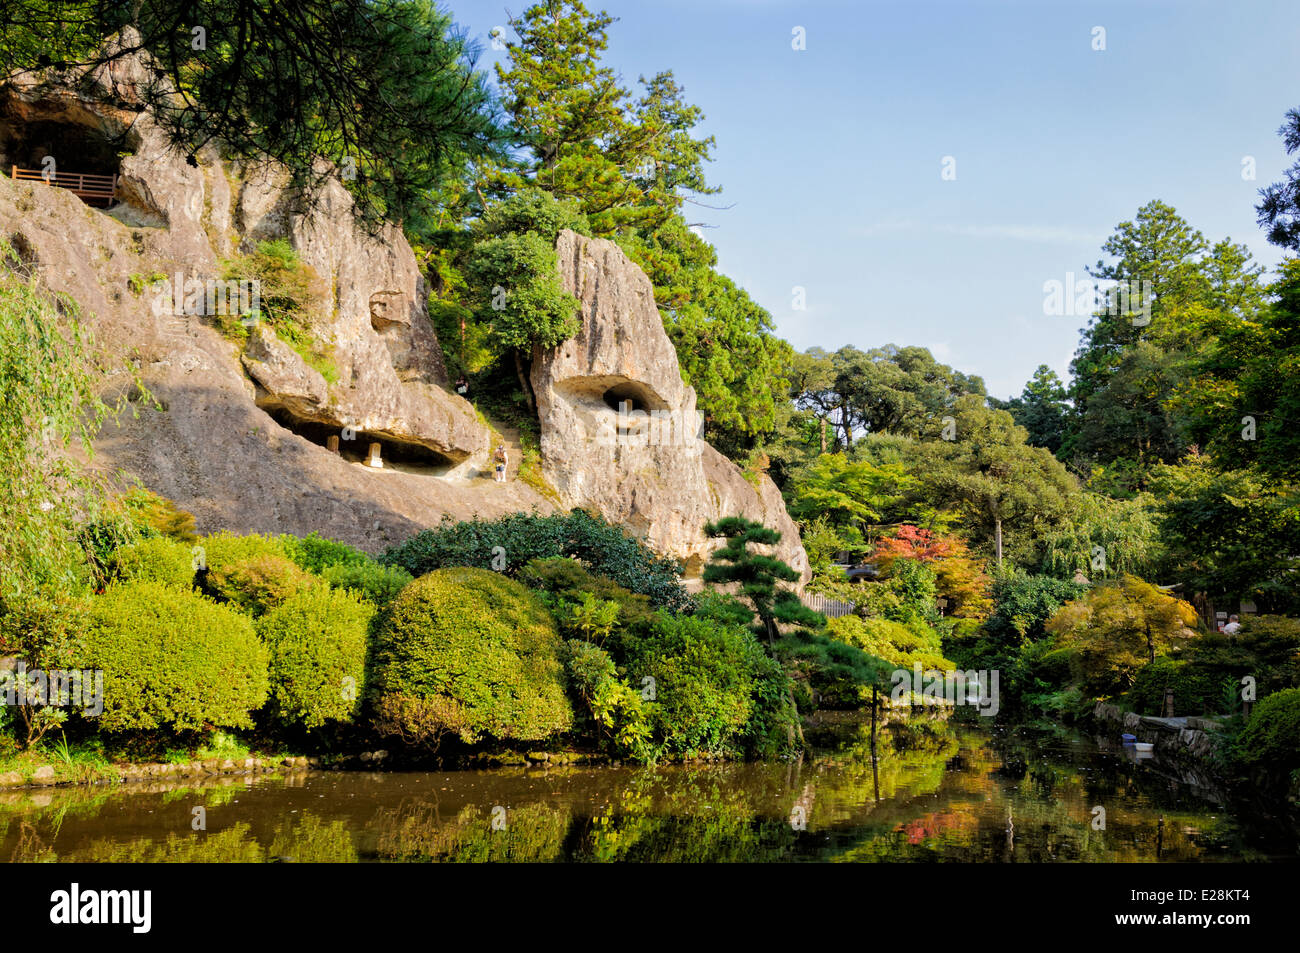 Japanese temple garden. Gardens such as these are beautiful and ancient. Stock Photo